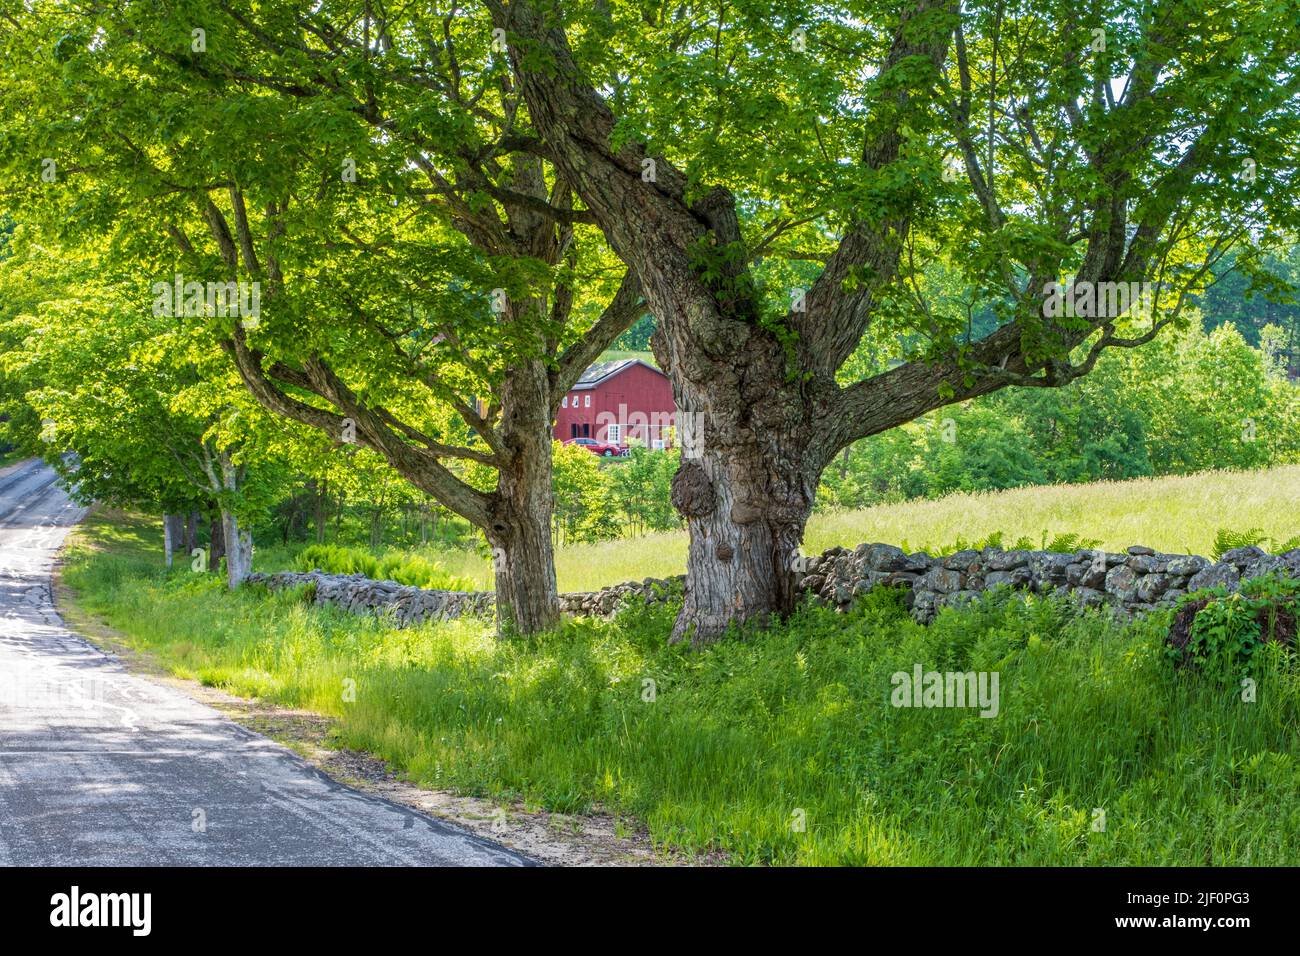 Maple trees along side a country road Stock Photo